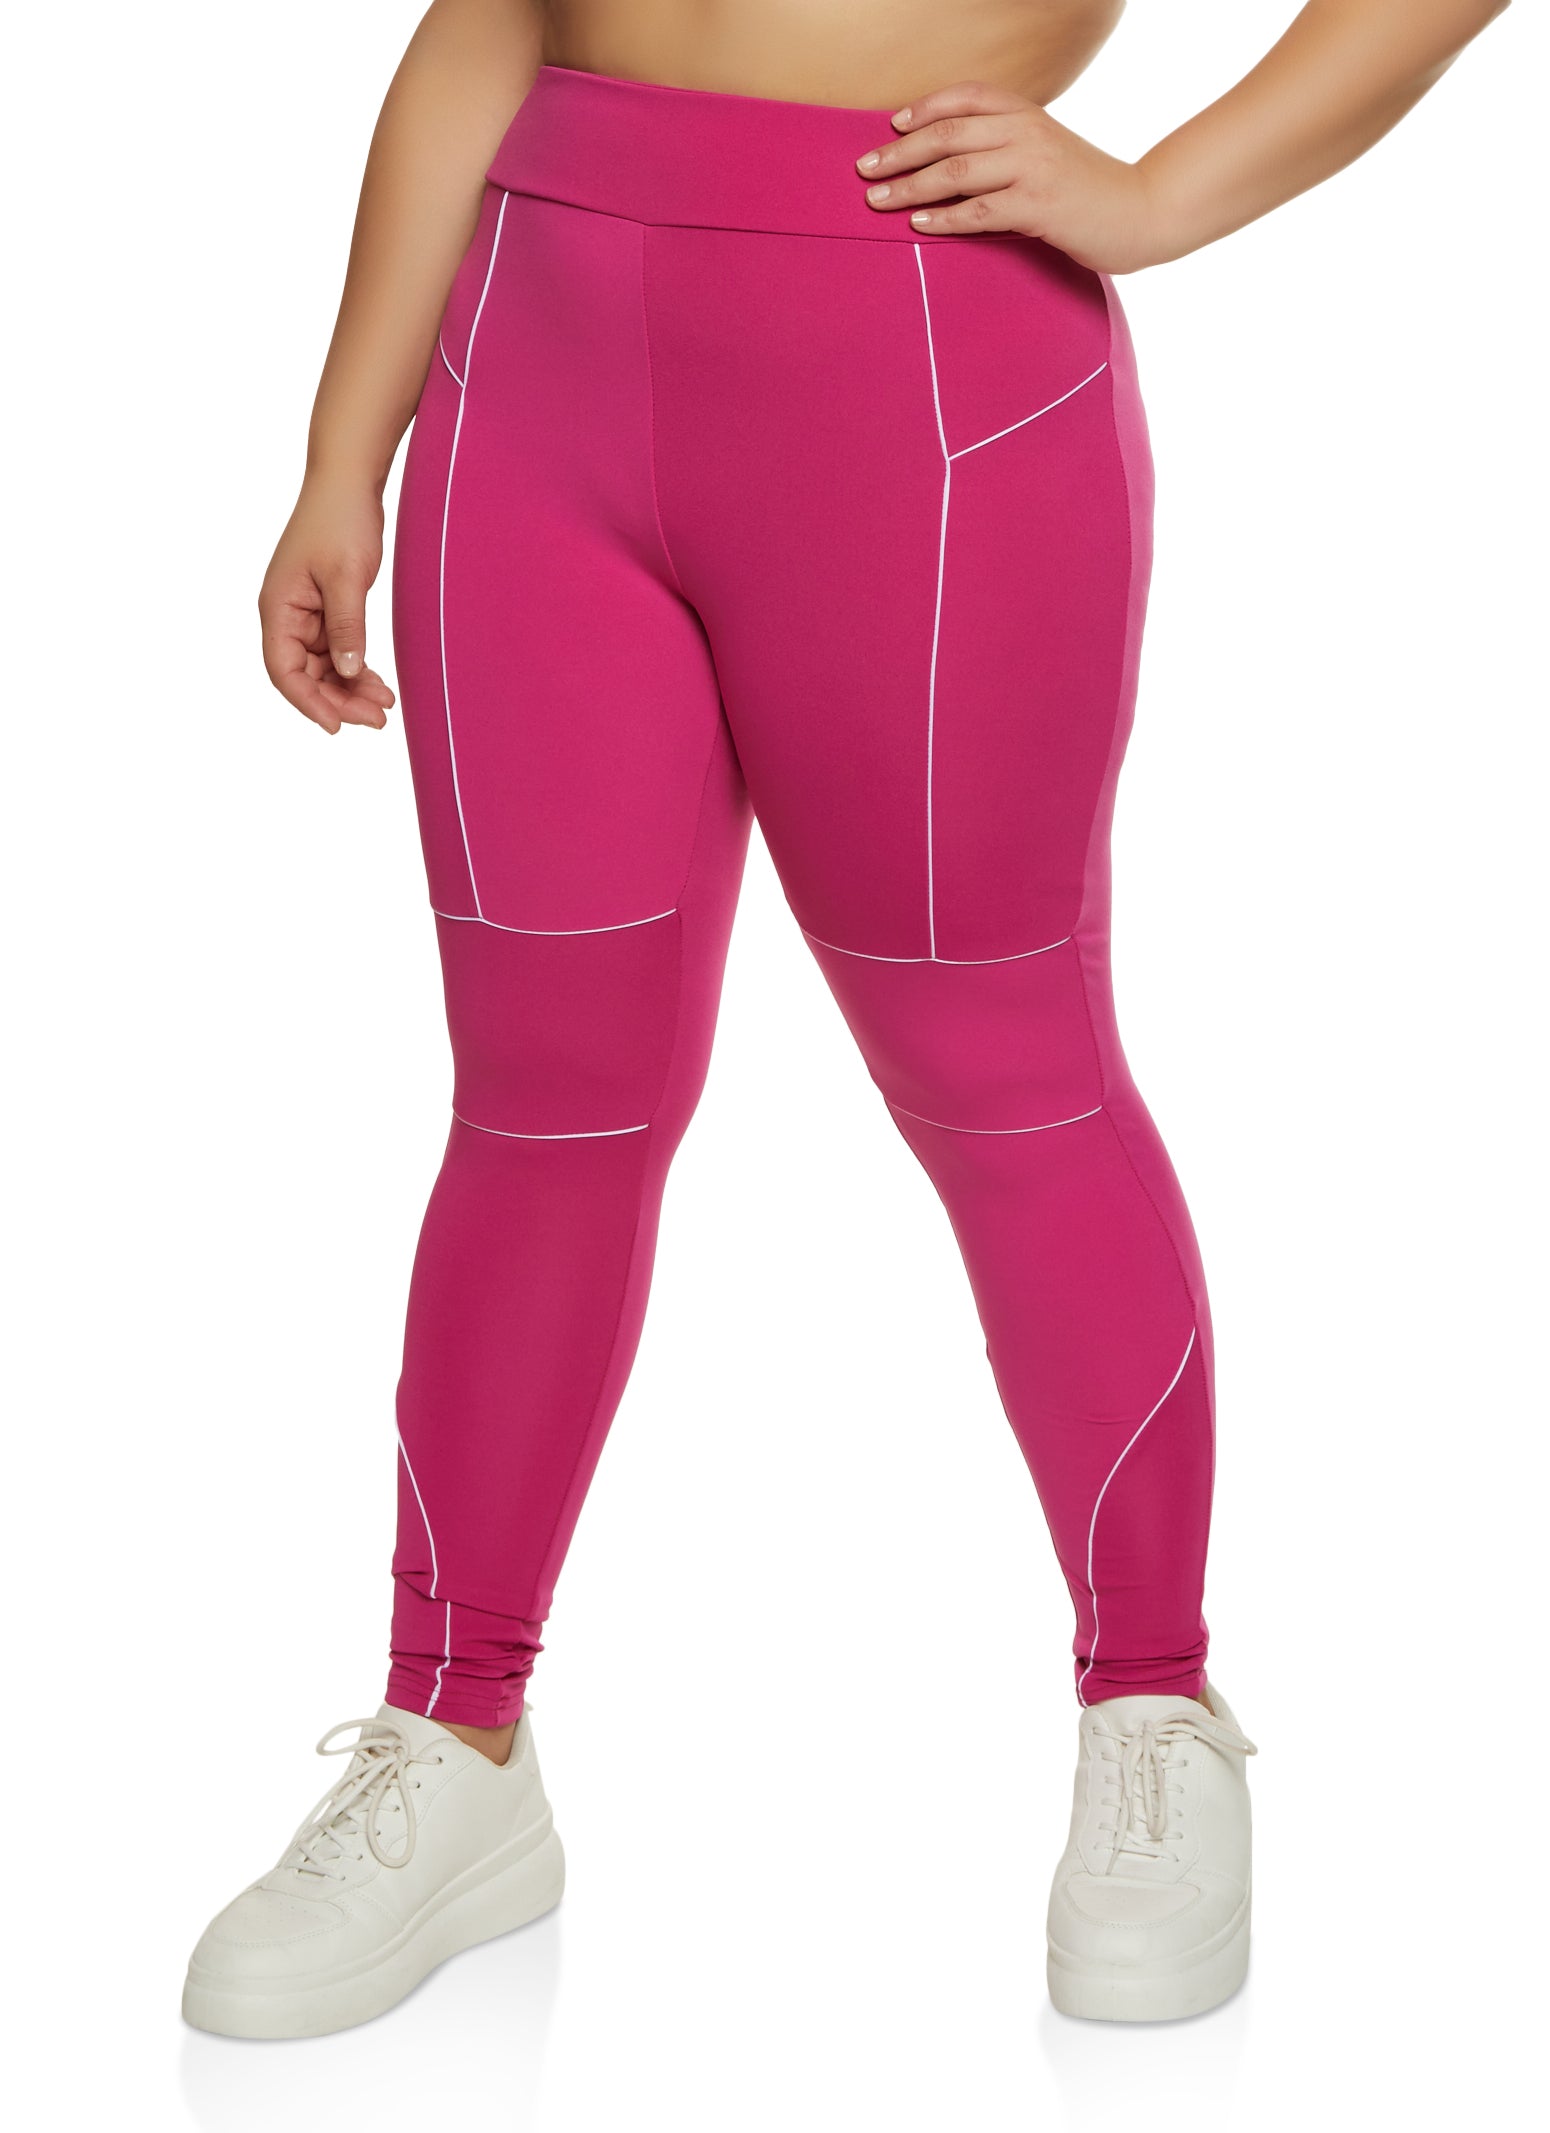 Rainbow Shops Womens Plus Size High Waist Contrast Piping Leggings, Pink, Size  3X